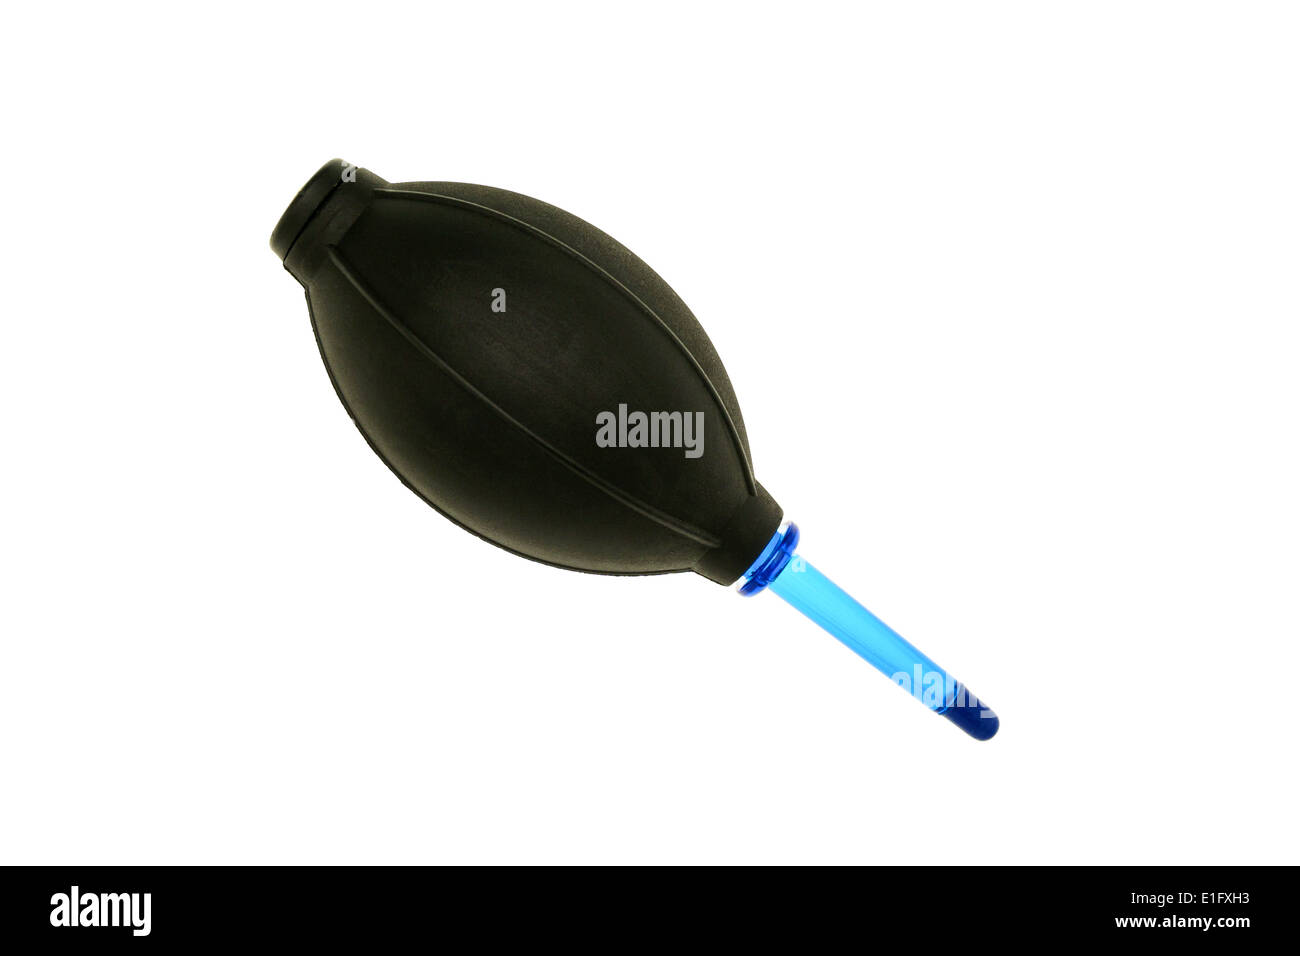 Black blower for cleaning the camera and sensor isolated with white background. Stock Photo